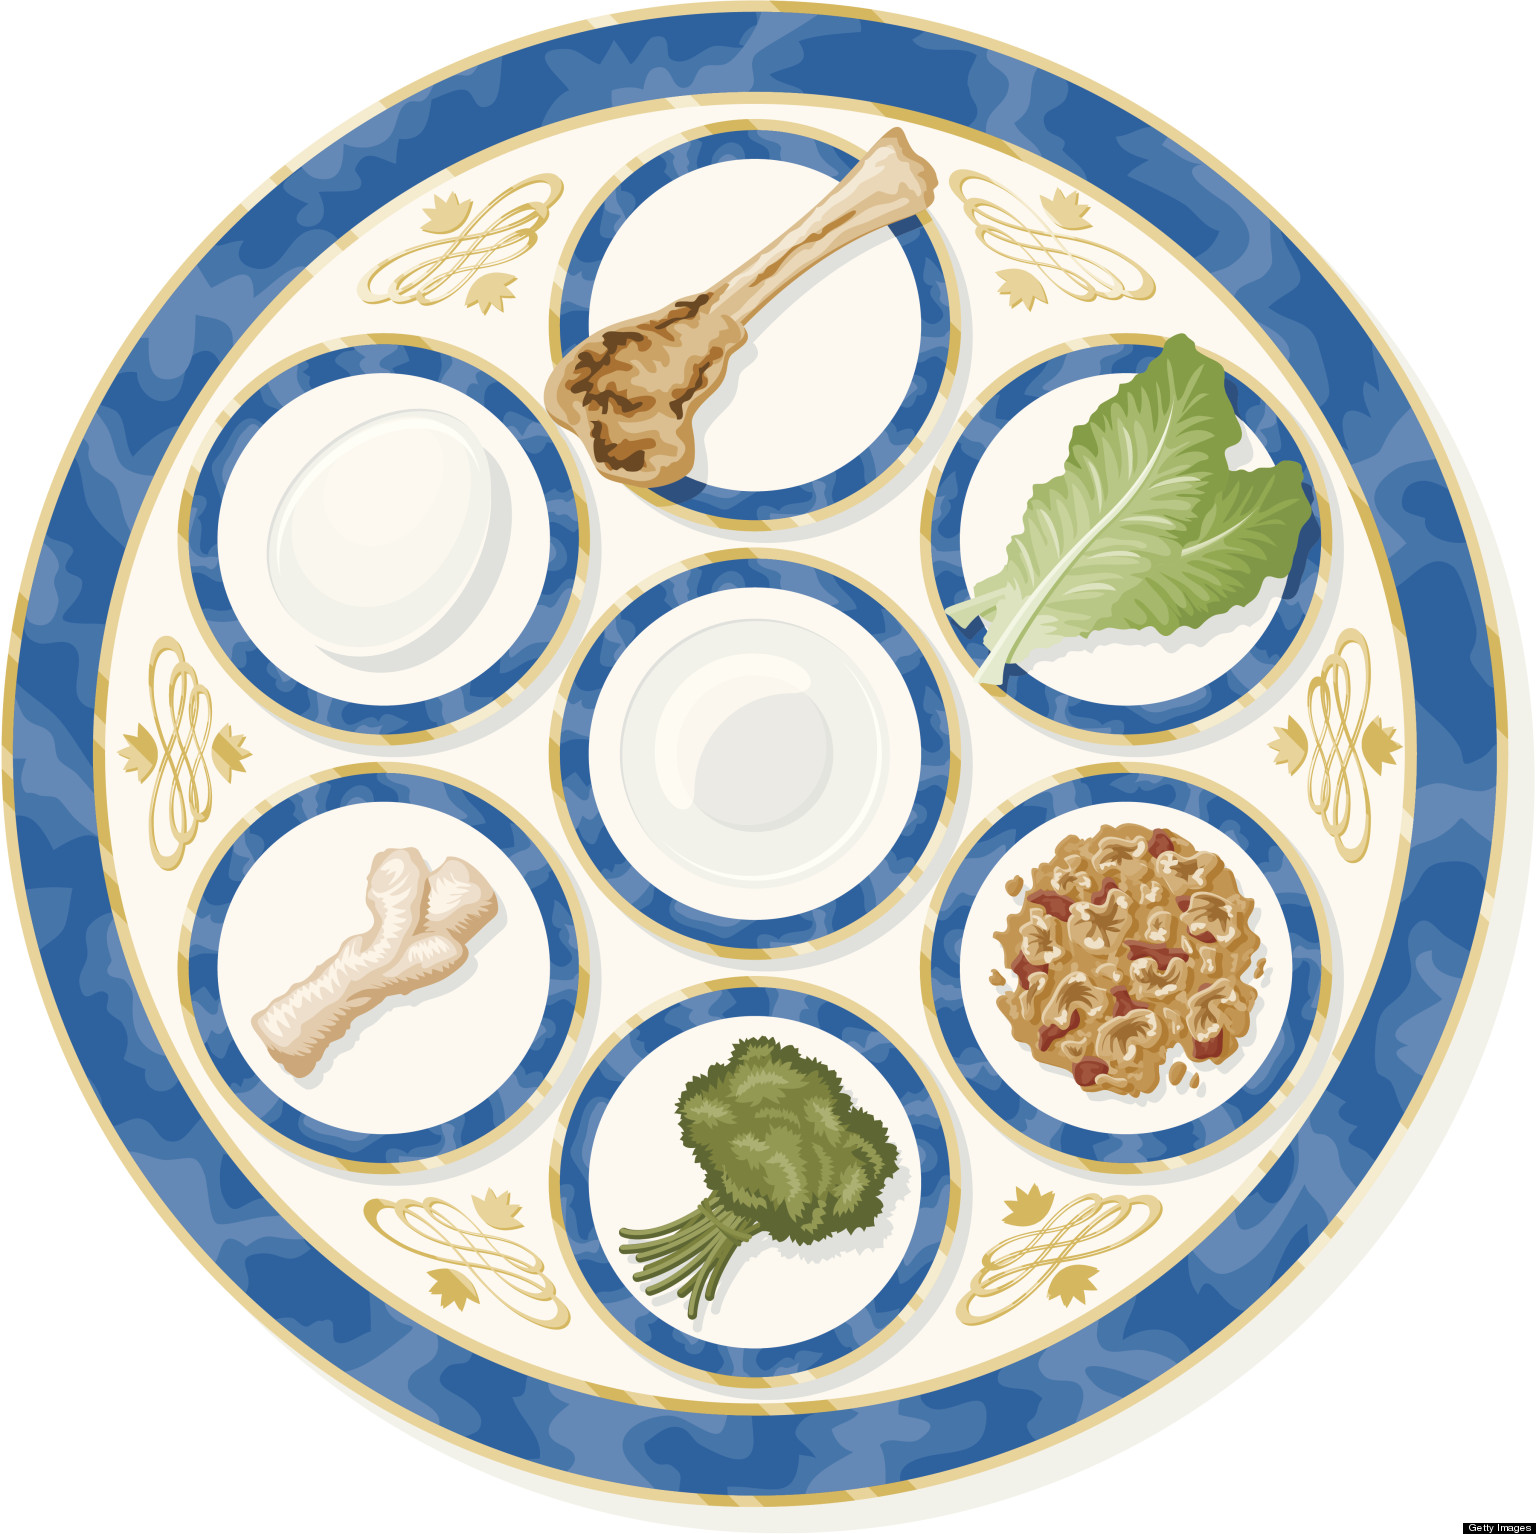 passover clipart passover table